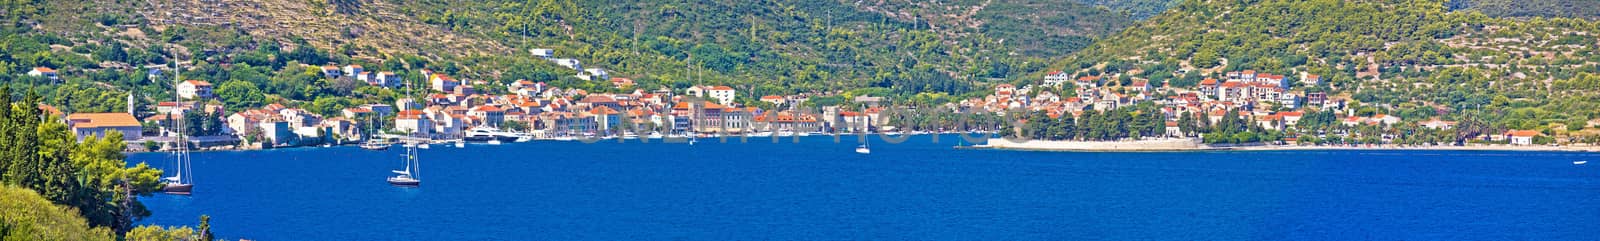 Island of Vis waterfront panorama by xbrchx